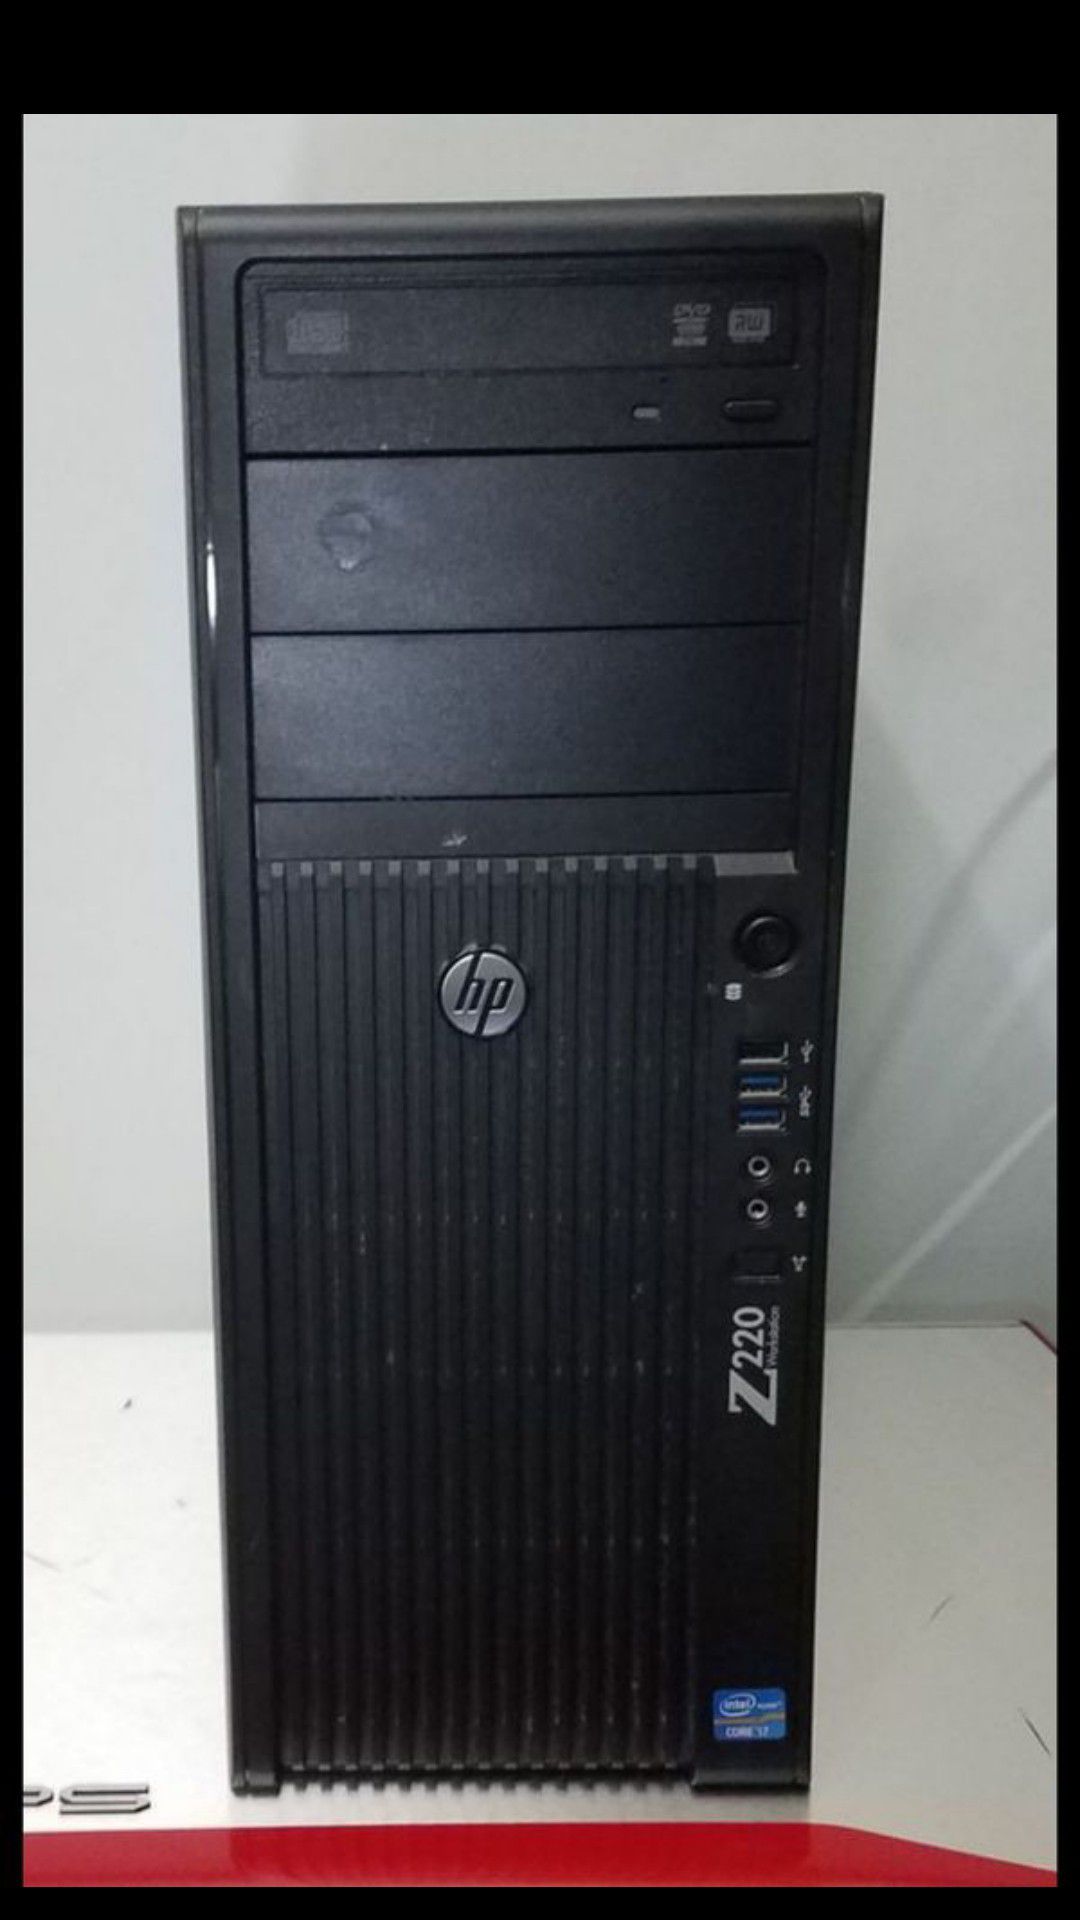 GAMING PC. i7-3770 3.4 ghz